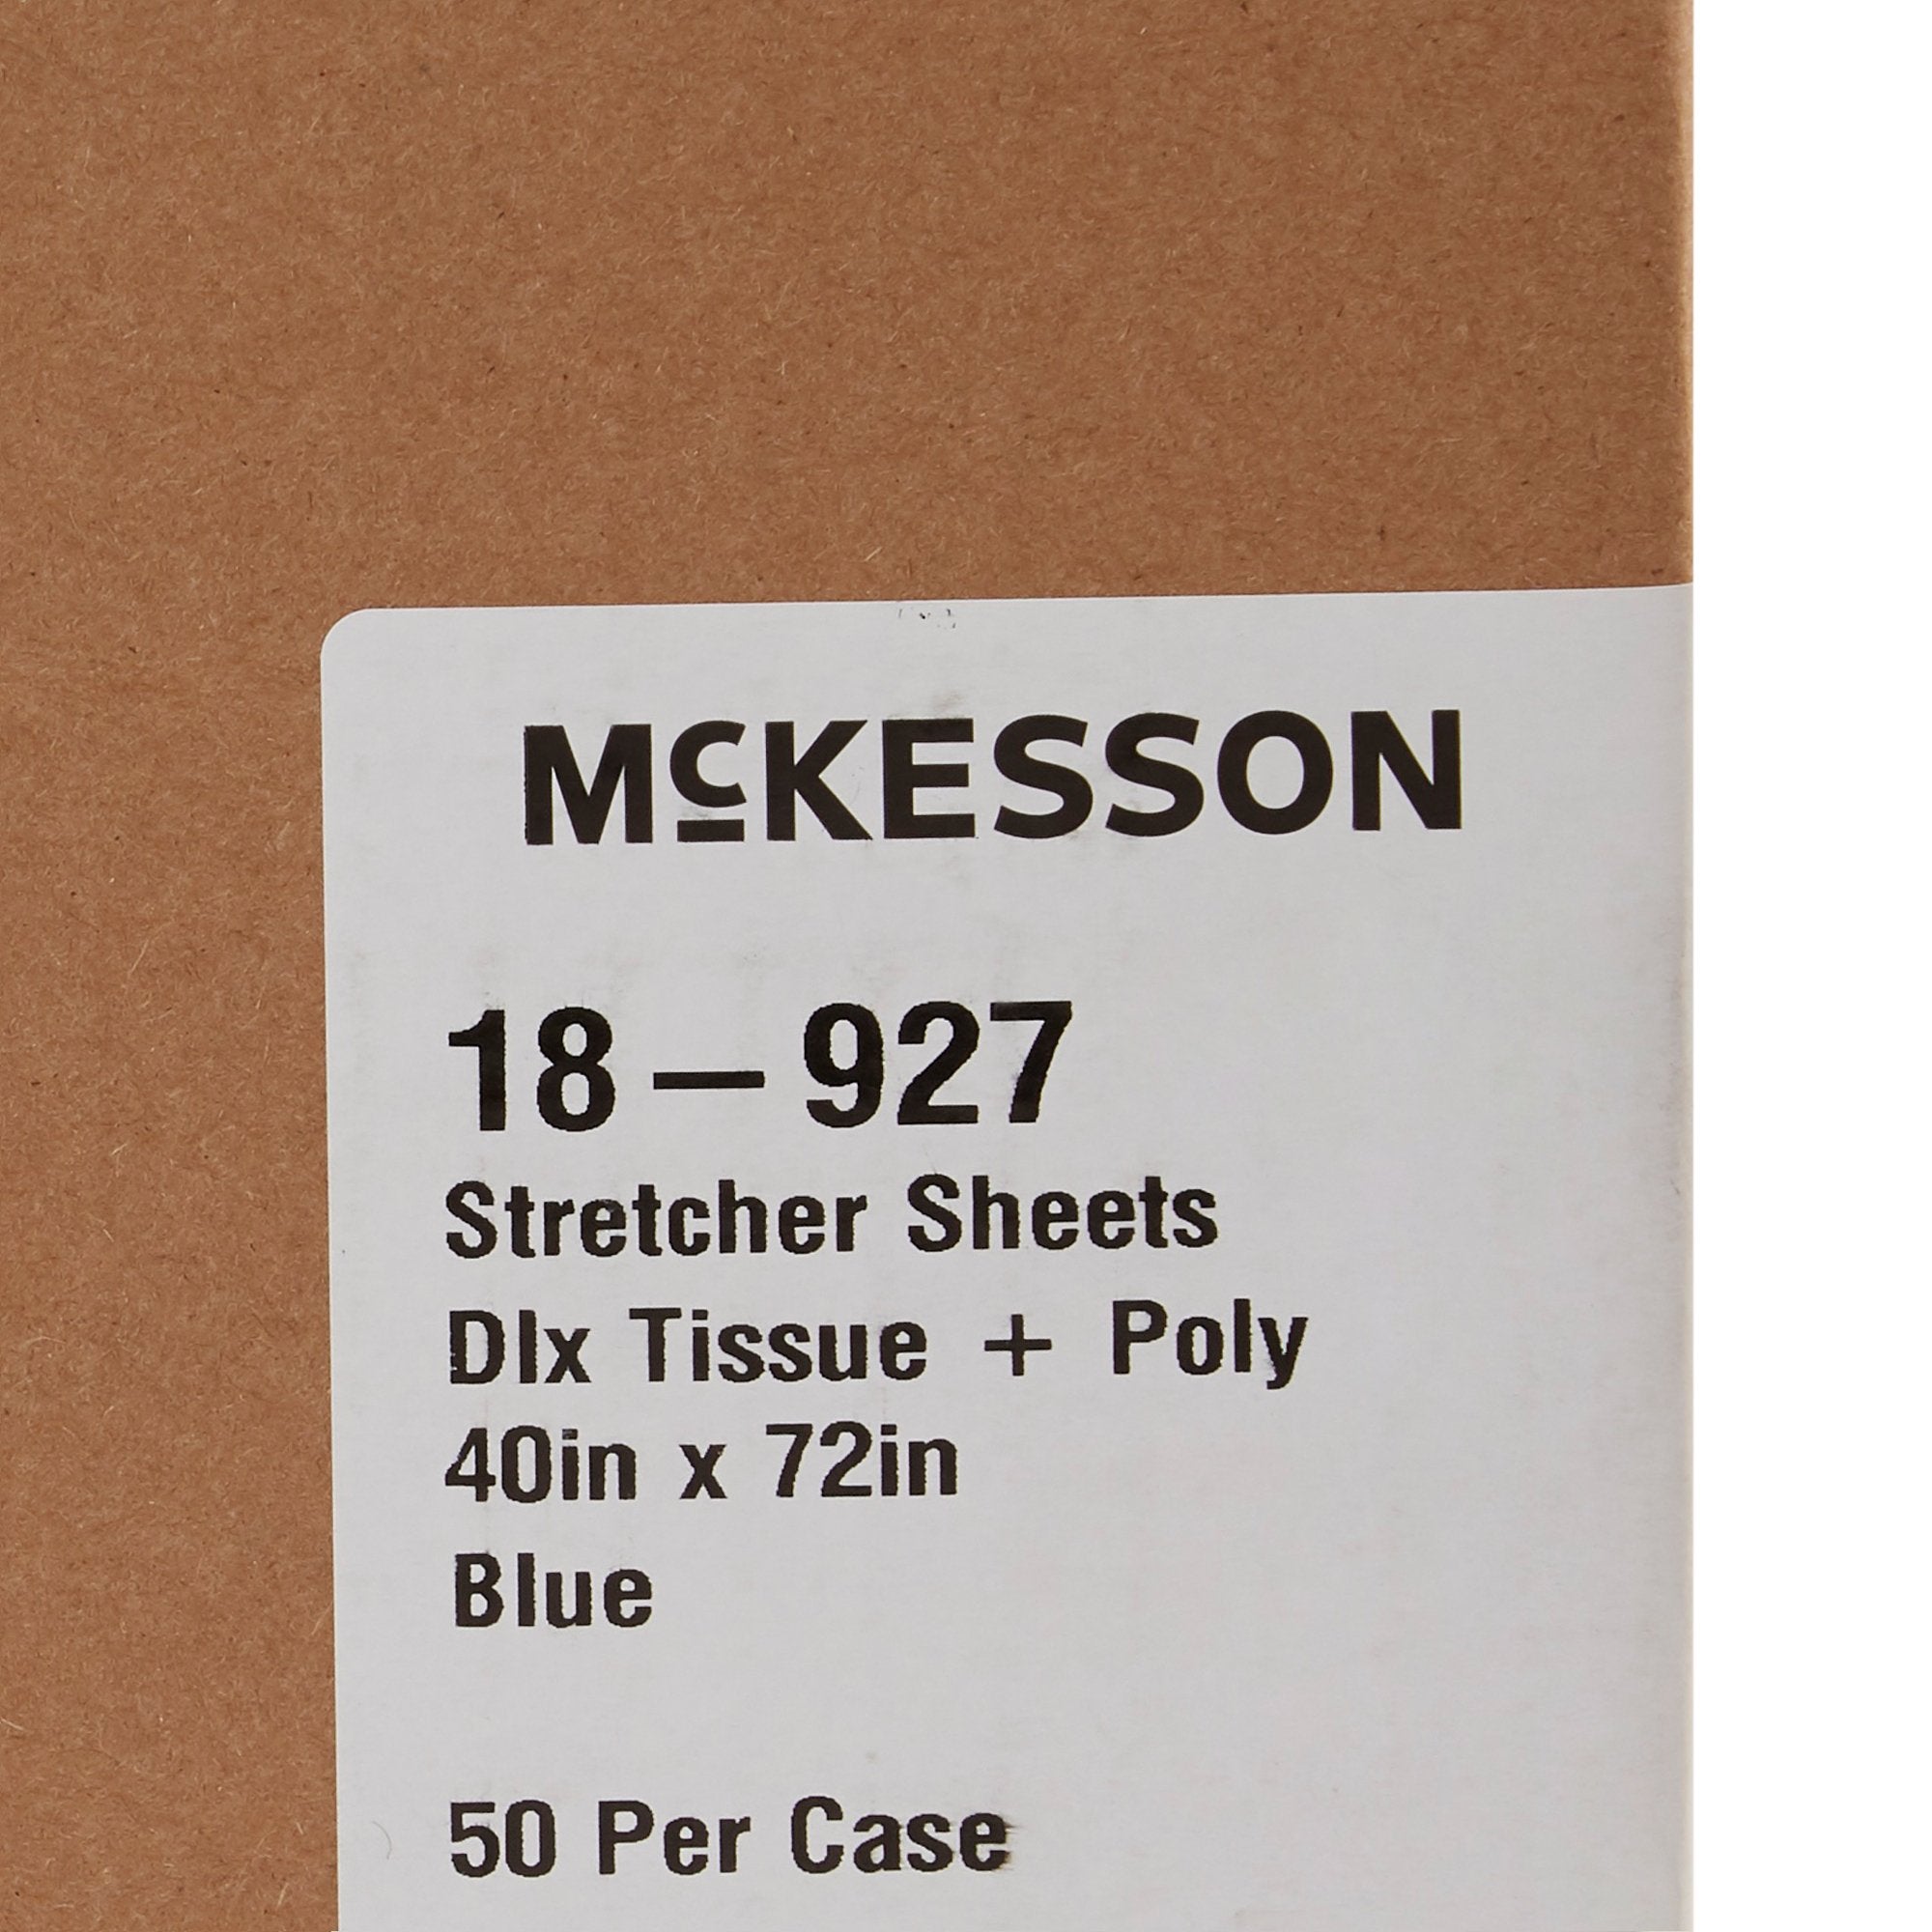 Lab & Scientific Supplies>Drapes, Sheets & Covers - McKesson - Wasatch Medical Supply